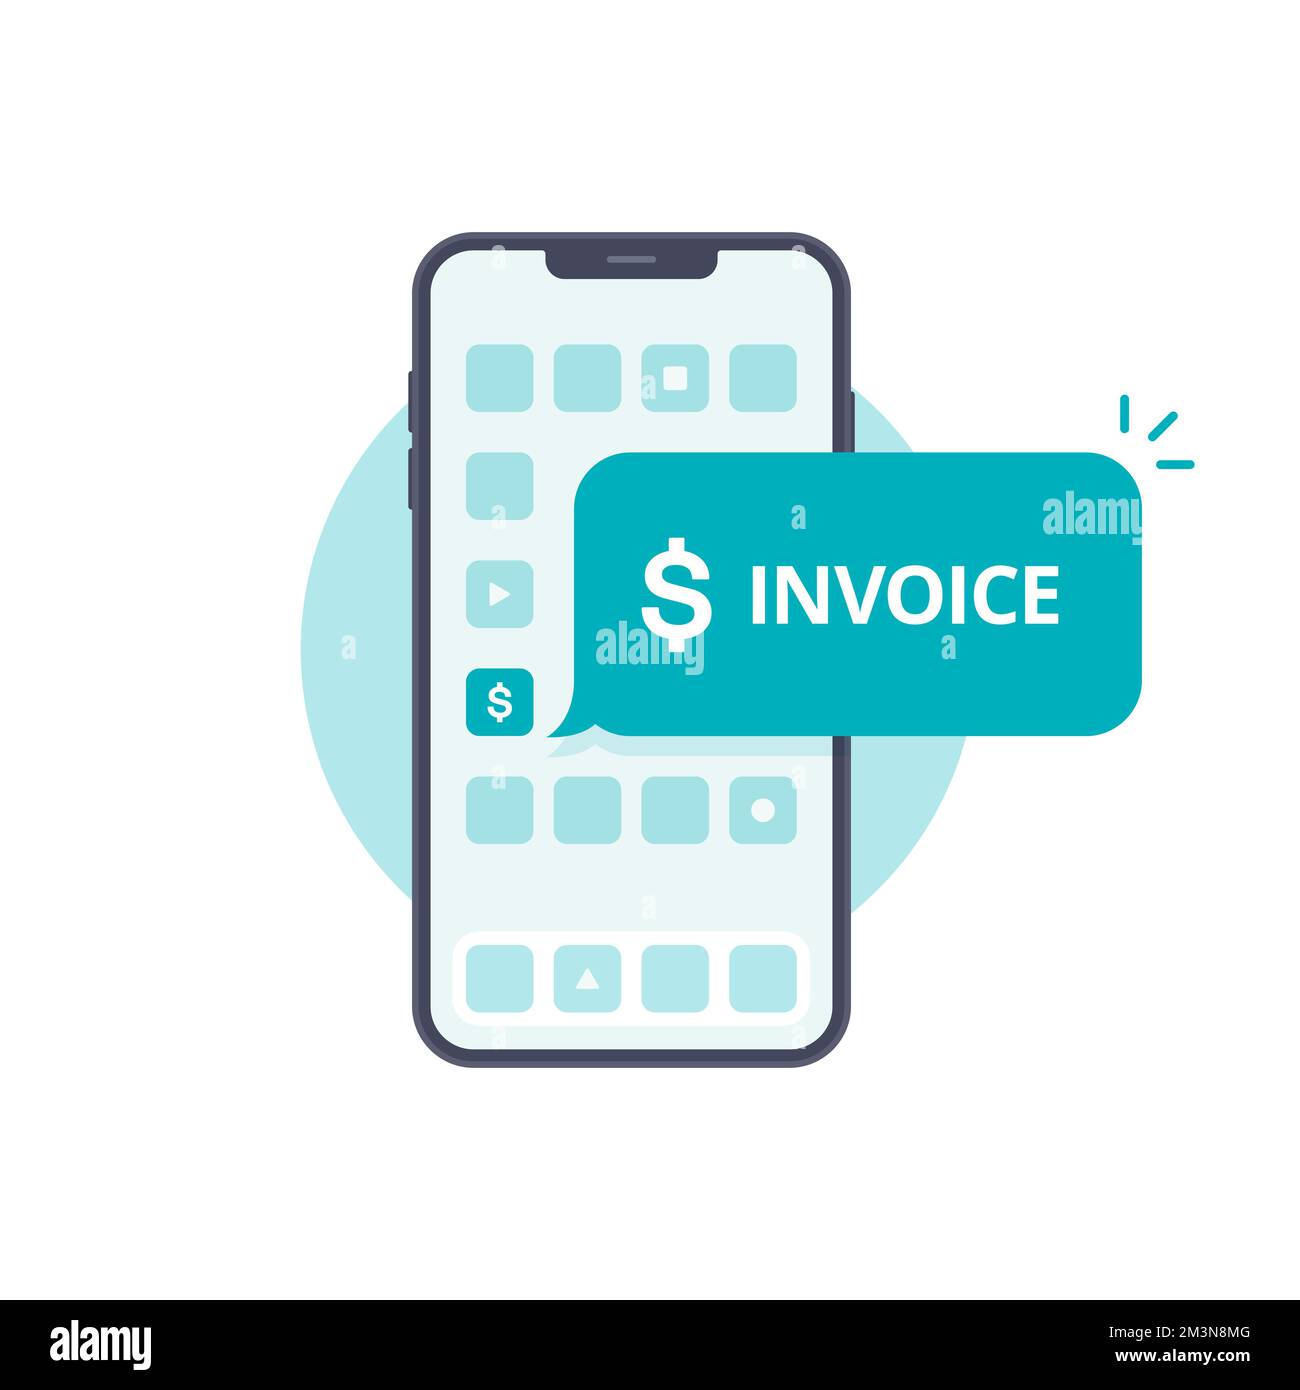 Invoice on smartphone app. Digital bill on mobile phone icon concept. Notification message on telephone with invoice payment. Online bill payment on s Stock Vector